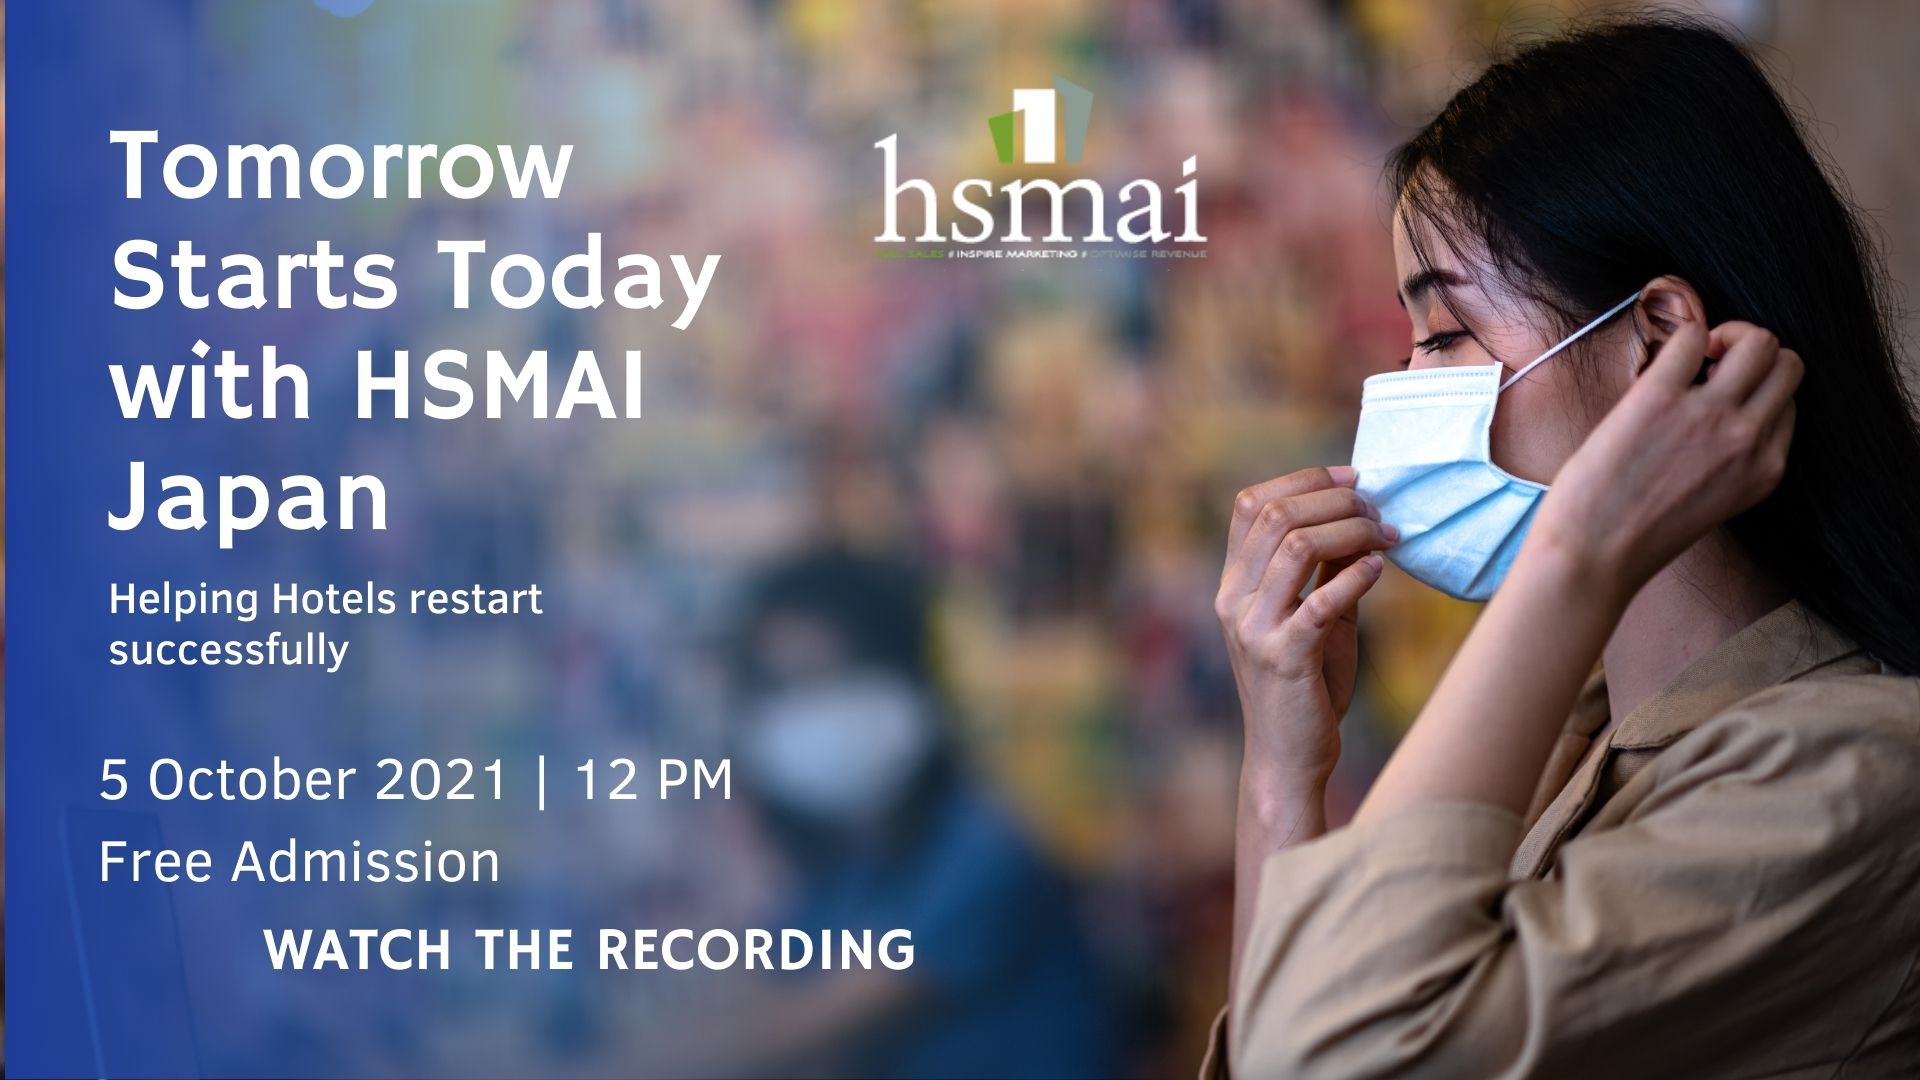 “Tomorrow starts Today” with HSMAI Japan